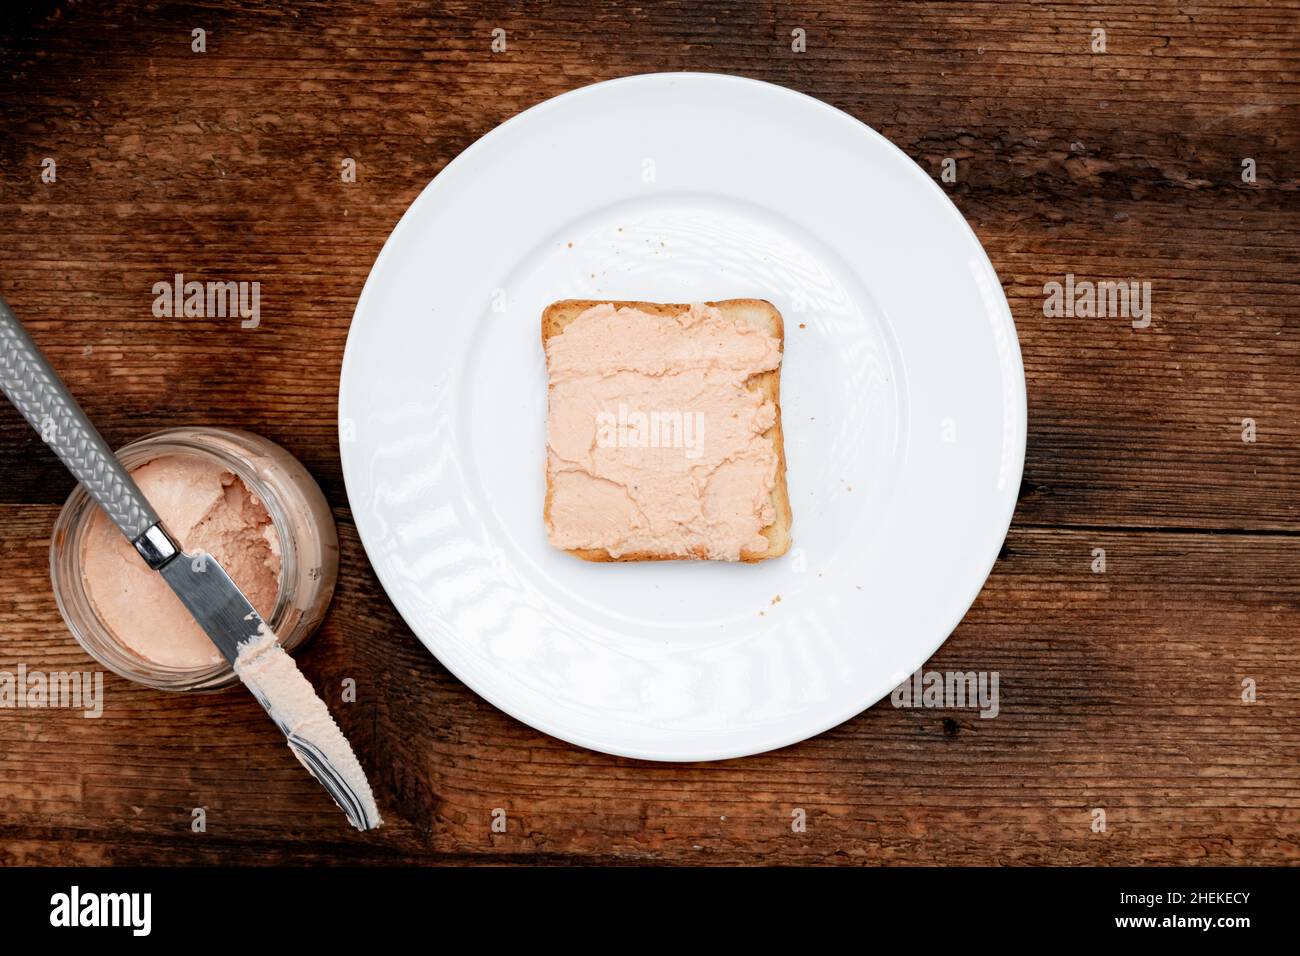 https://c8.alamy.com/comp/2HEKECY/on-toast-creamy-pasta-on-a-white-plate-dark-wooden-background-food-concept-a-quick-snack-top-view-2HEKECY.jpg